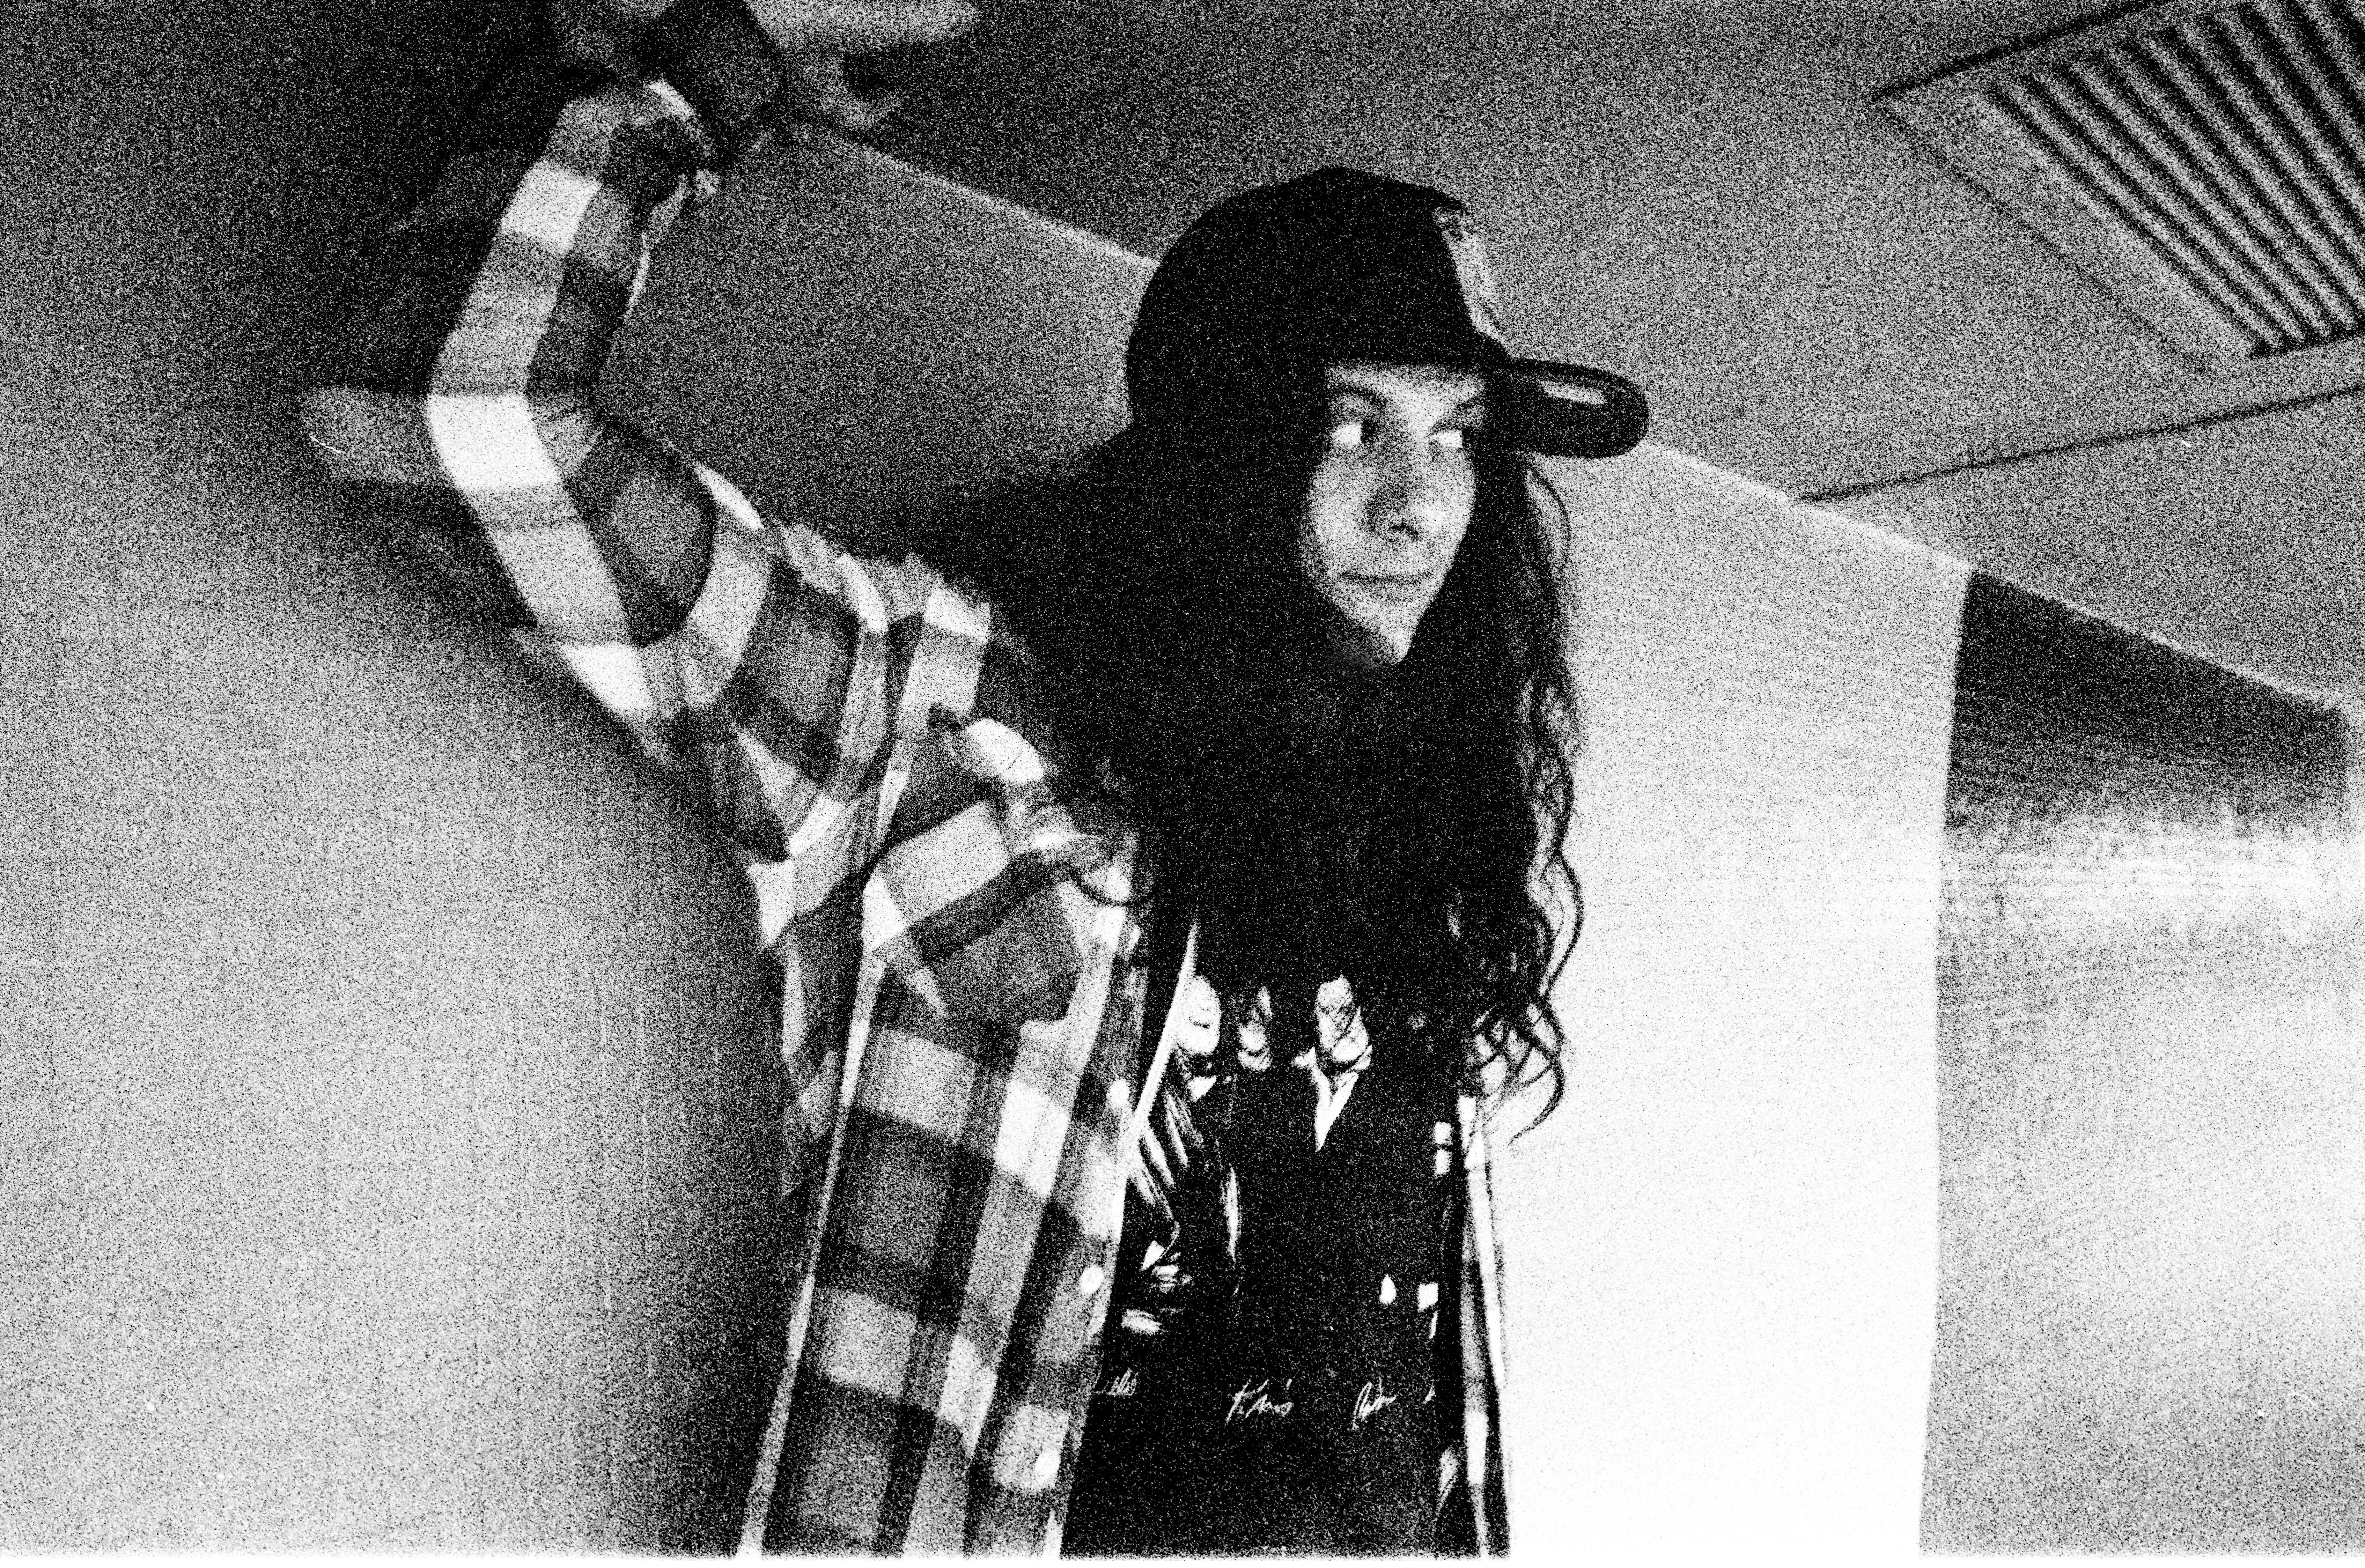 Kurt Vile shares new single "Onr Trick Pony", the track is off his forthcoming Matador Records release 'Bottle It In', out October 11th